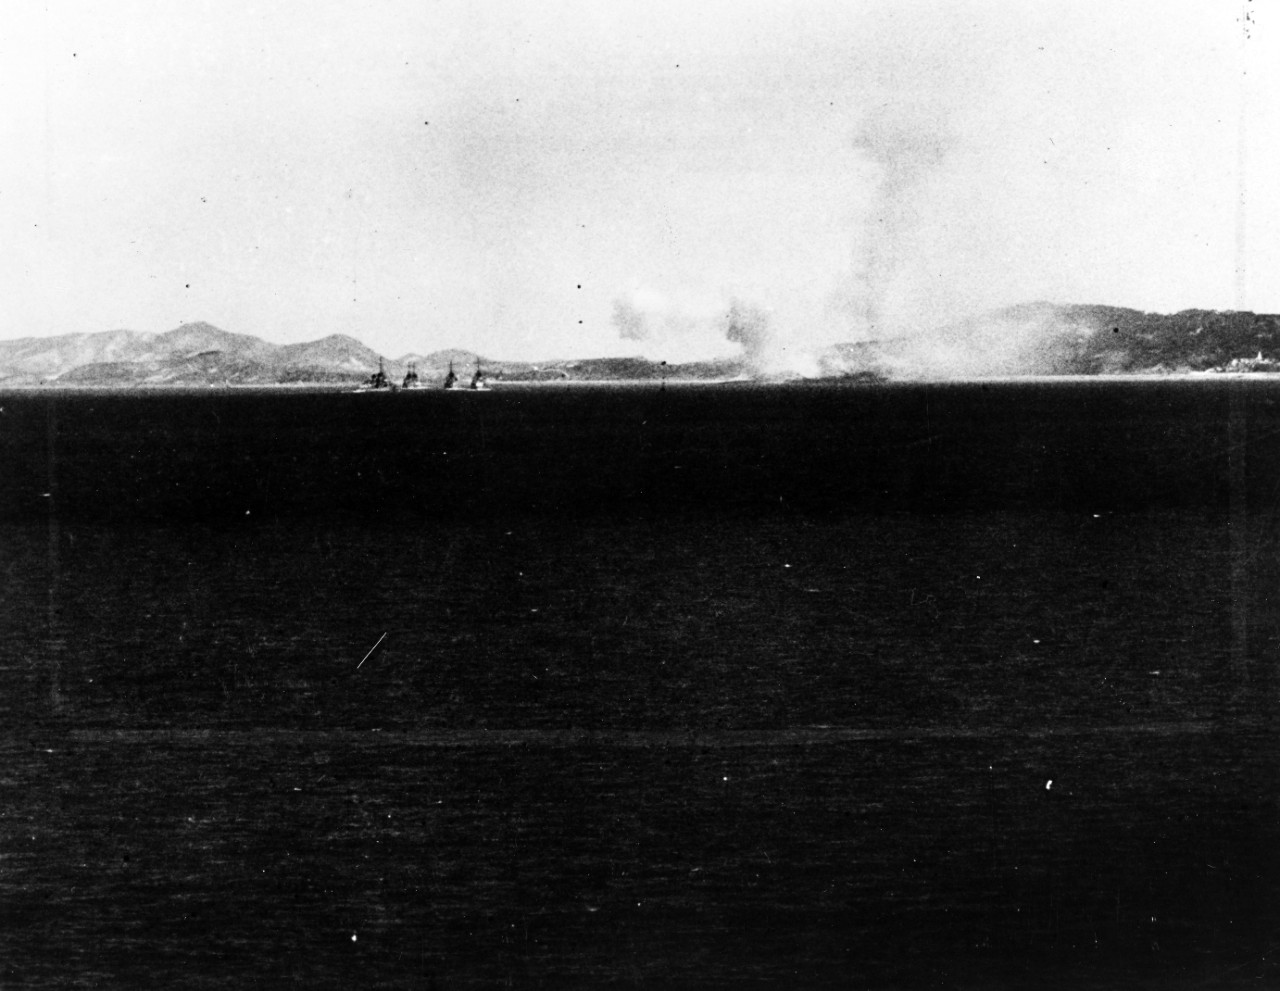 Five U.S. Navy destroyers steam up the Inchon channel to bombard Wolmi-Do island on 13 September 1950, two days prior to the Inchon landings.